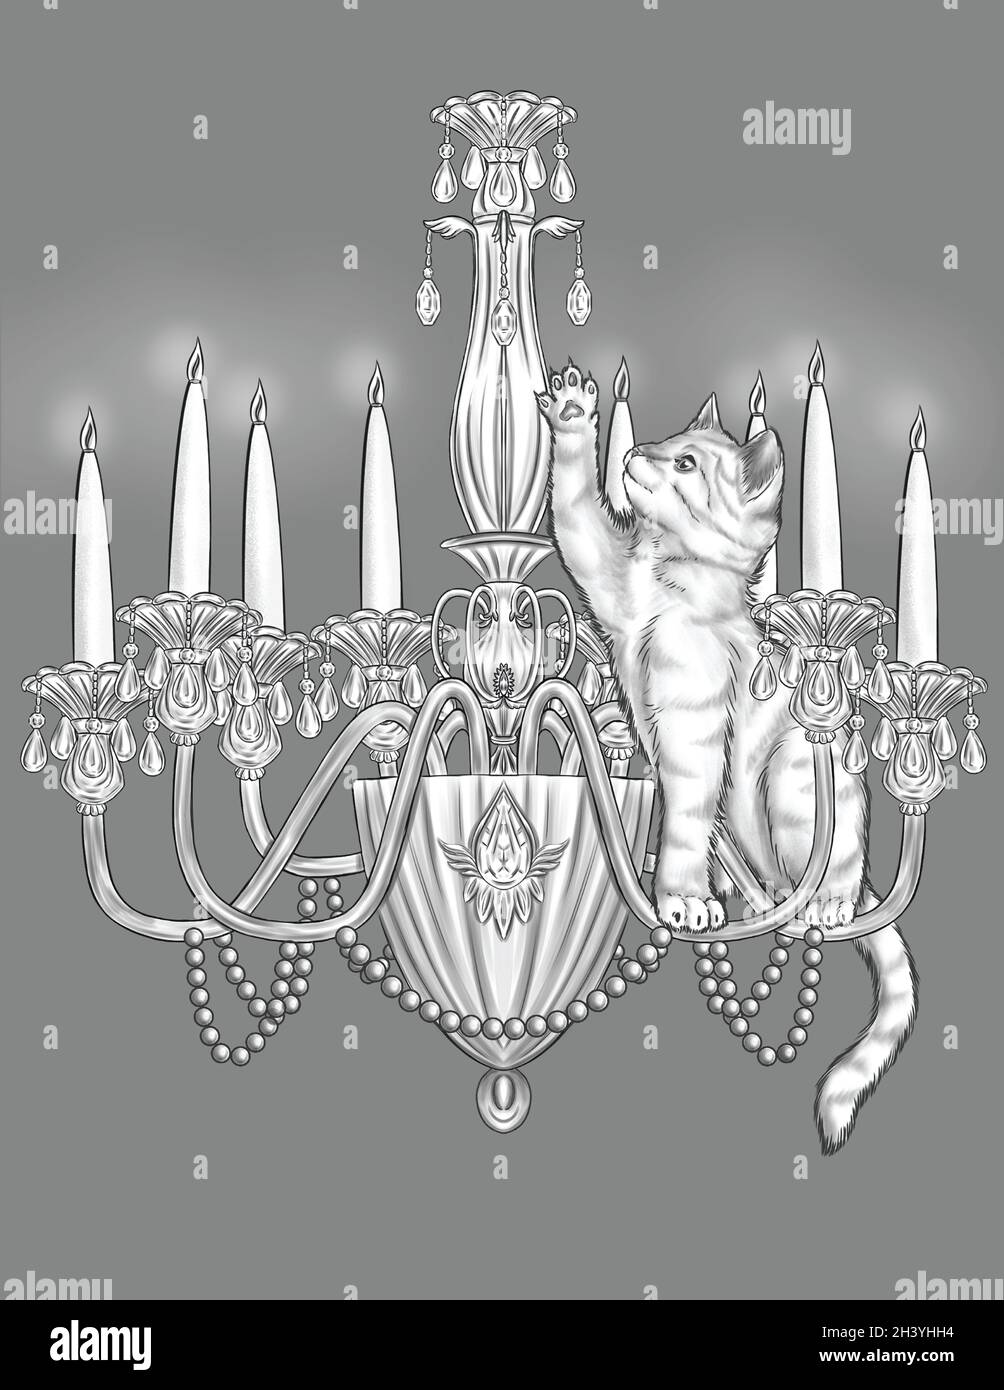 Playful Cat On Top Of A Lit Candle Chandelier Raising Paw Colorless Line Drawing. Small Feline Hanging On Ceiling Light Coloring Stock Photo